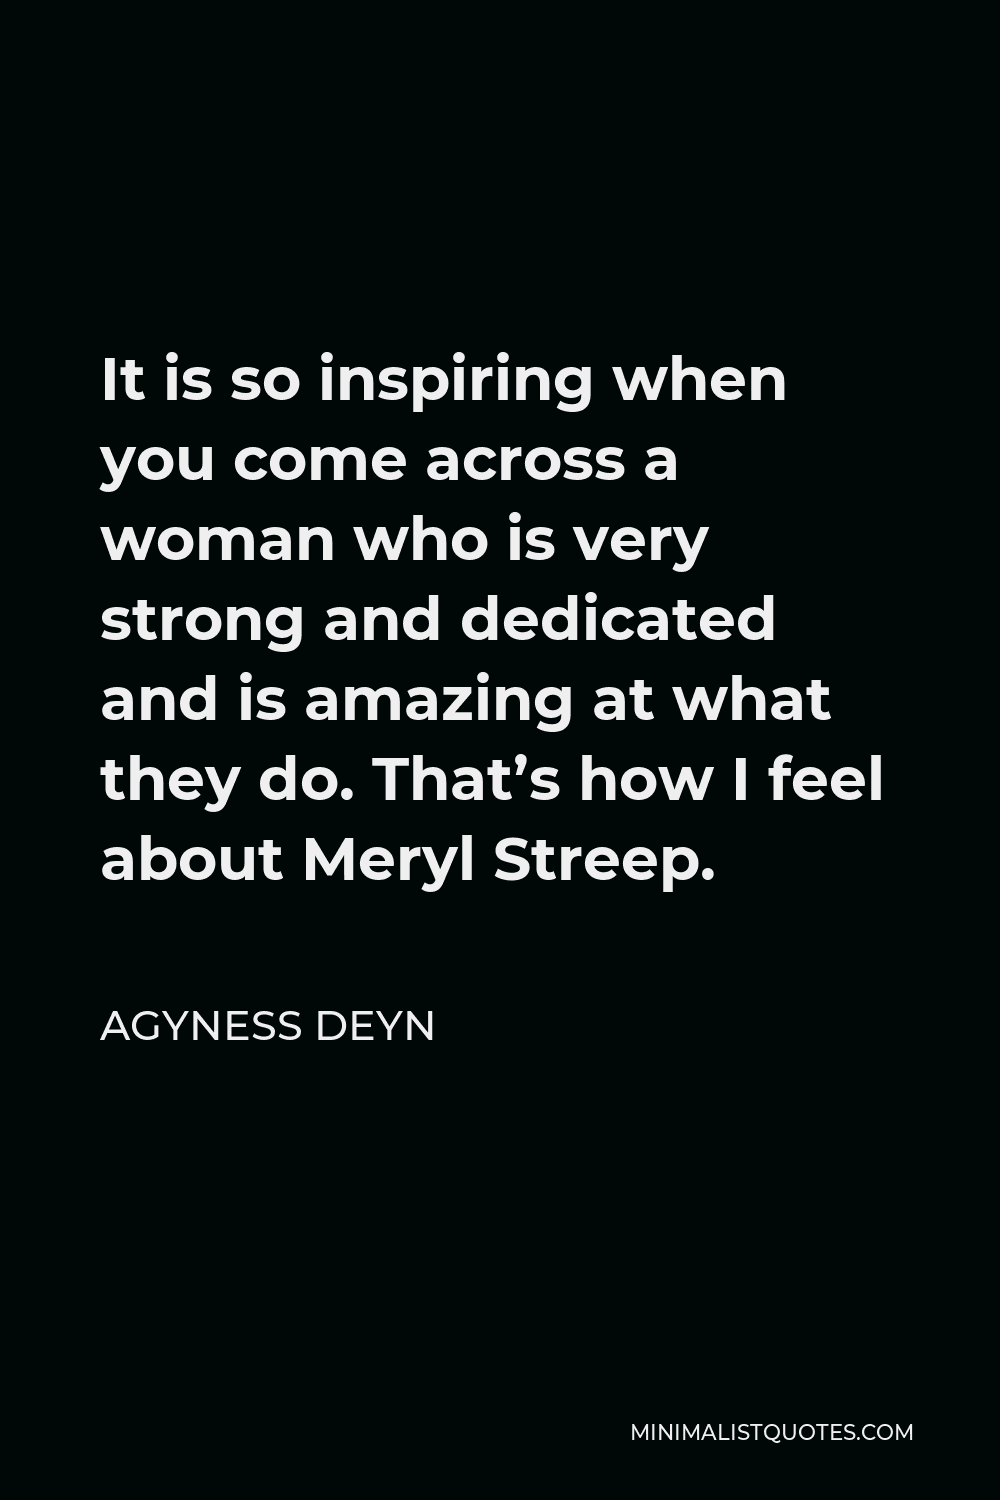 Agyness Deyn Quote - It is so inspiring when you come across a woman who is very strong and dedicated and is amazing at what they do. That’s how I feel about Meryl Streep.